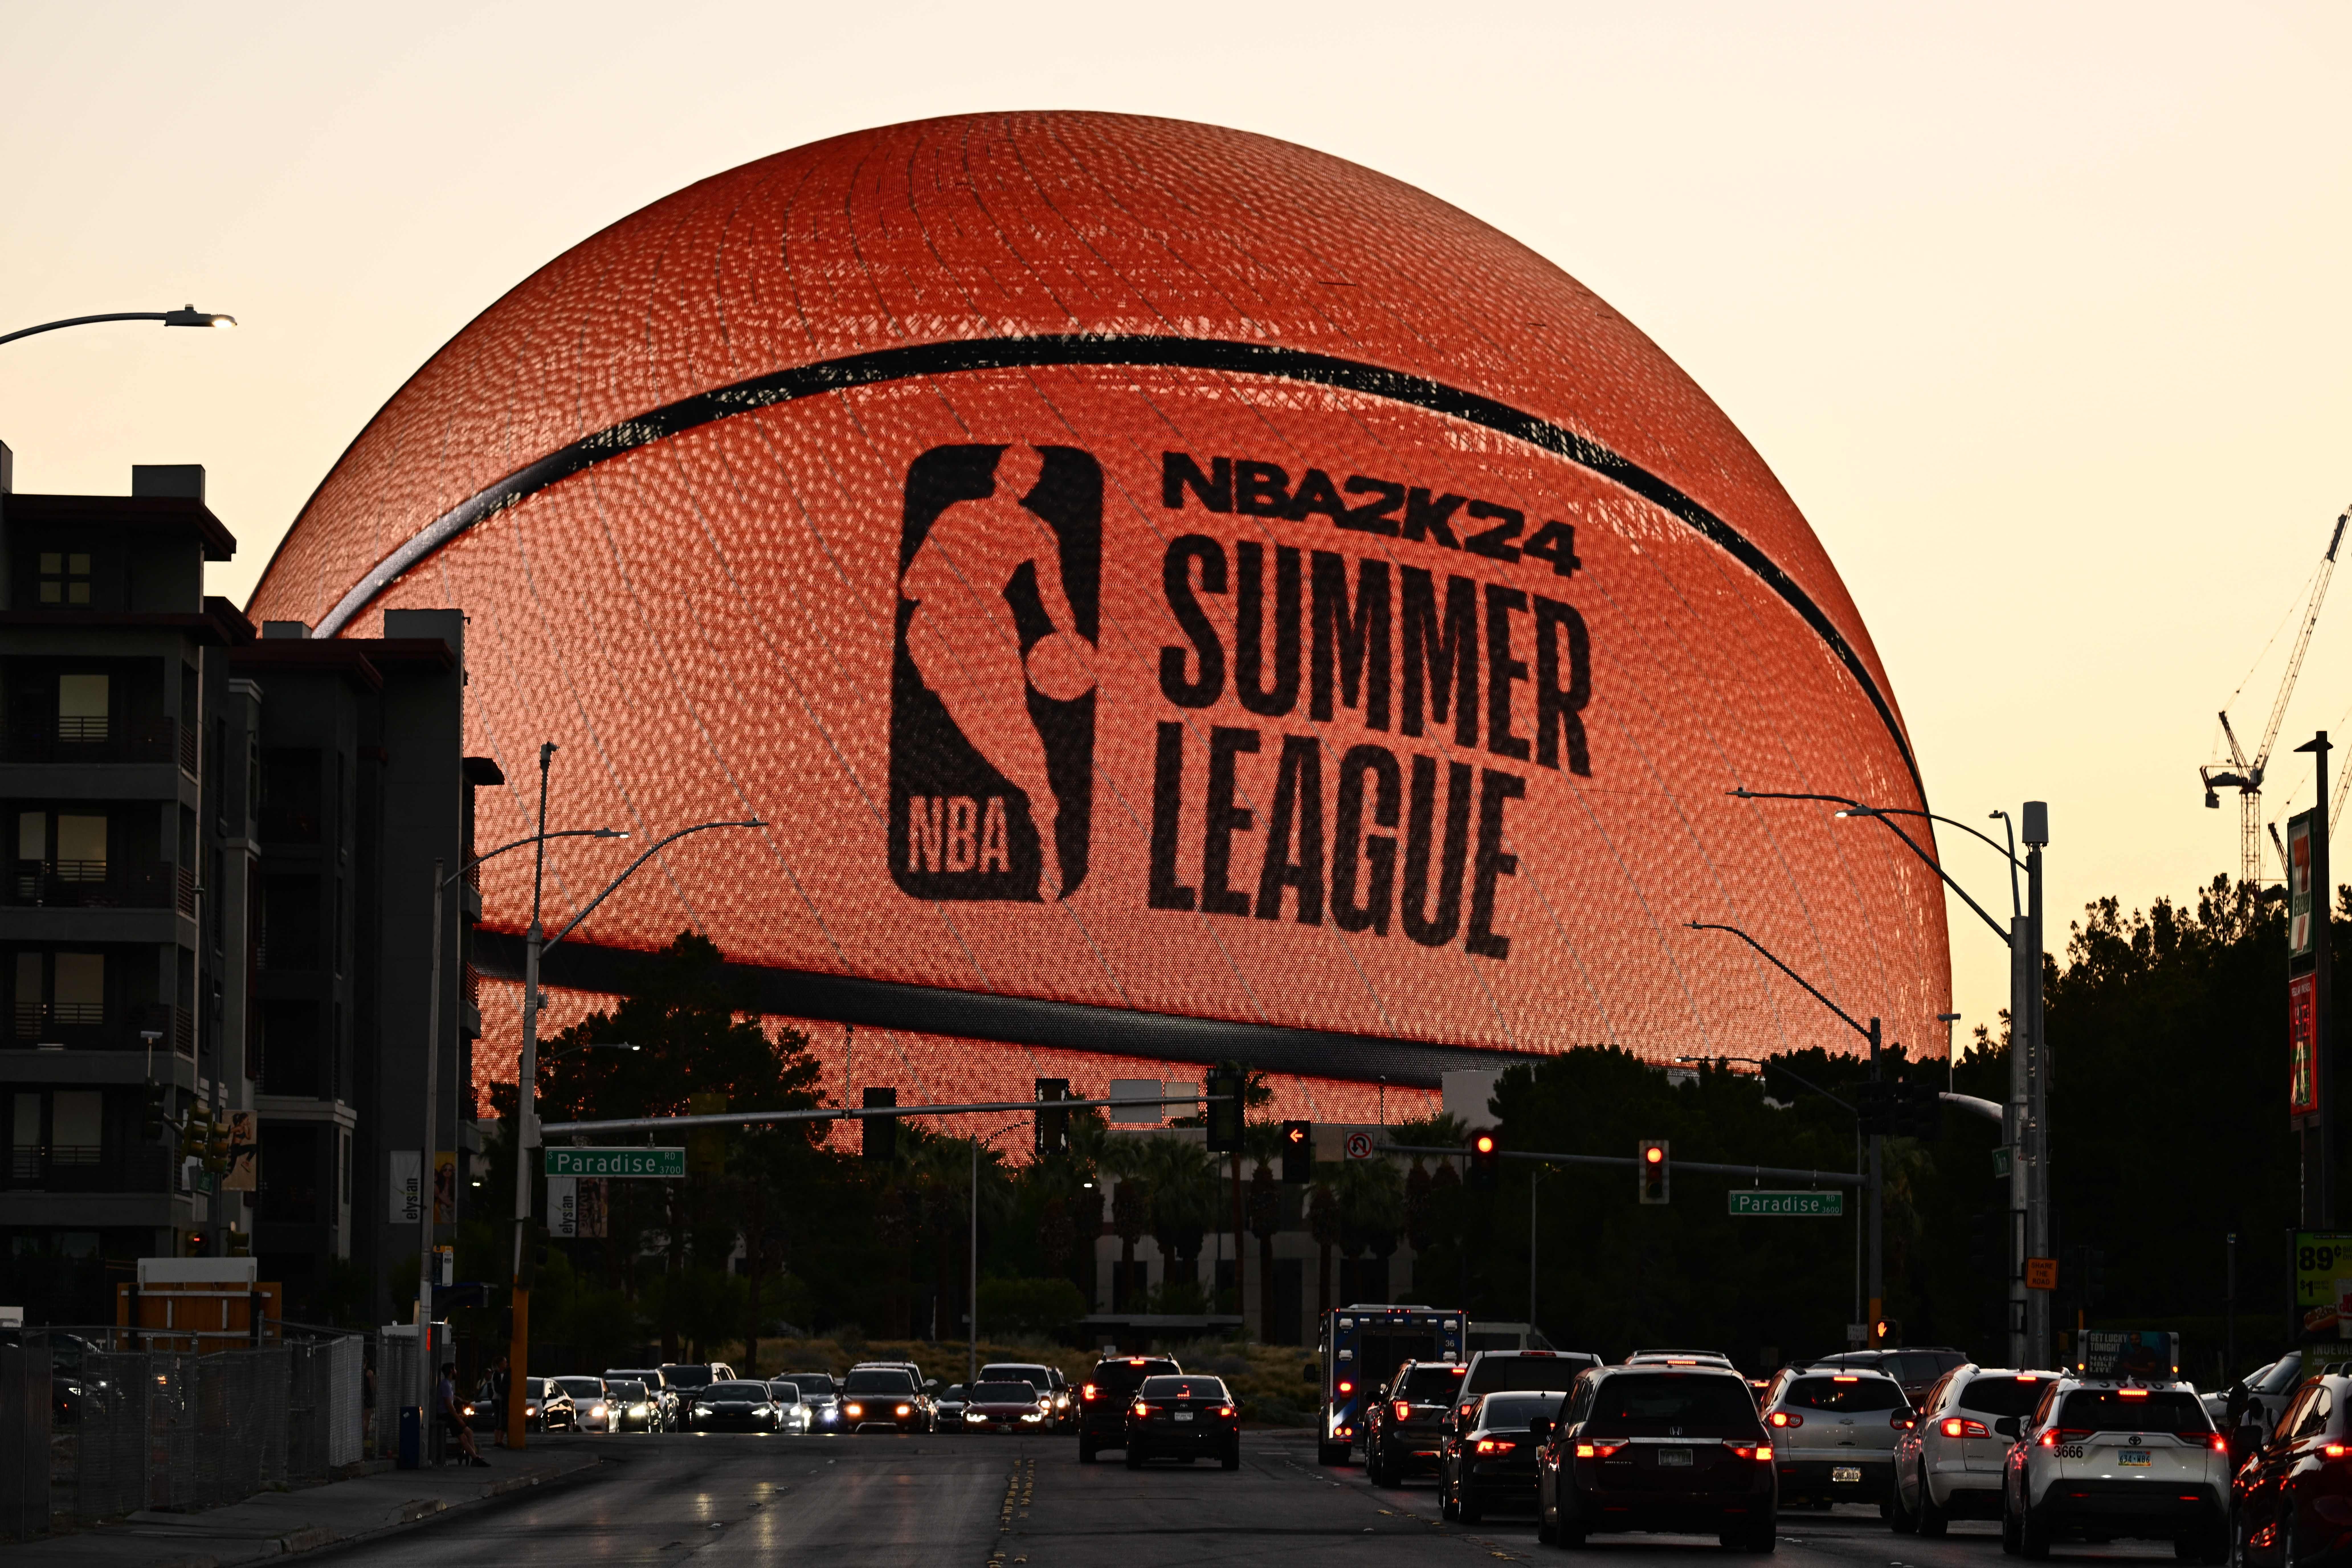 The MSG (Madison Square Garden) Sphere, new music entertainment arena, is lit up as a basketball to celebrate the 2023 NBA Summer League in Las Vegas, Nevada, on July 9, 2023.